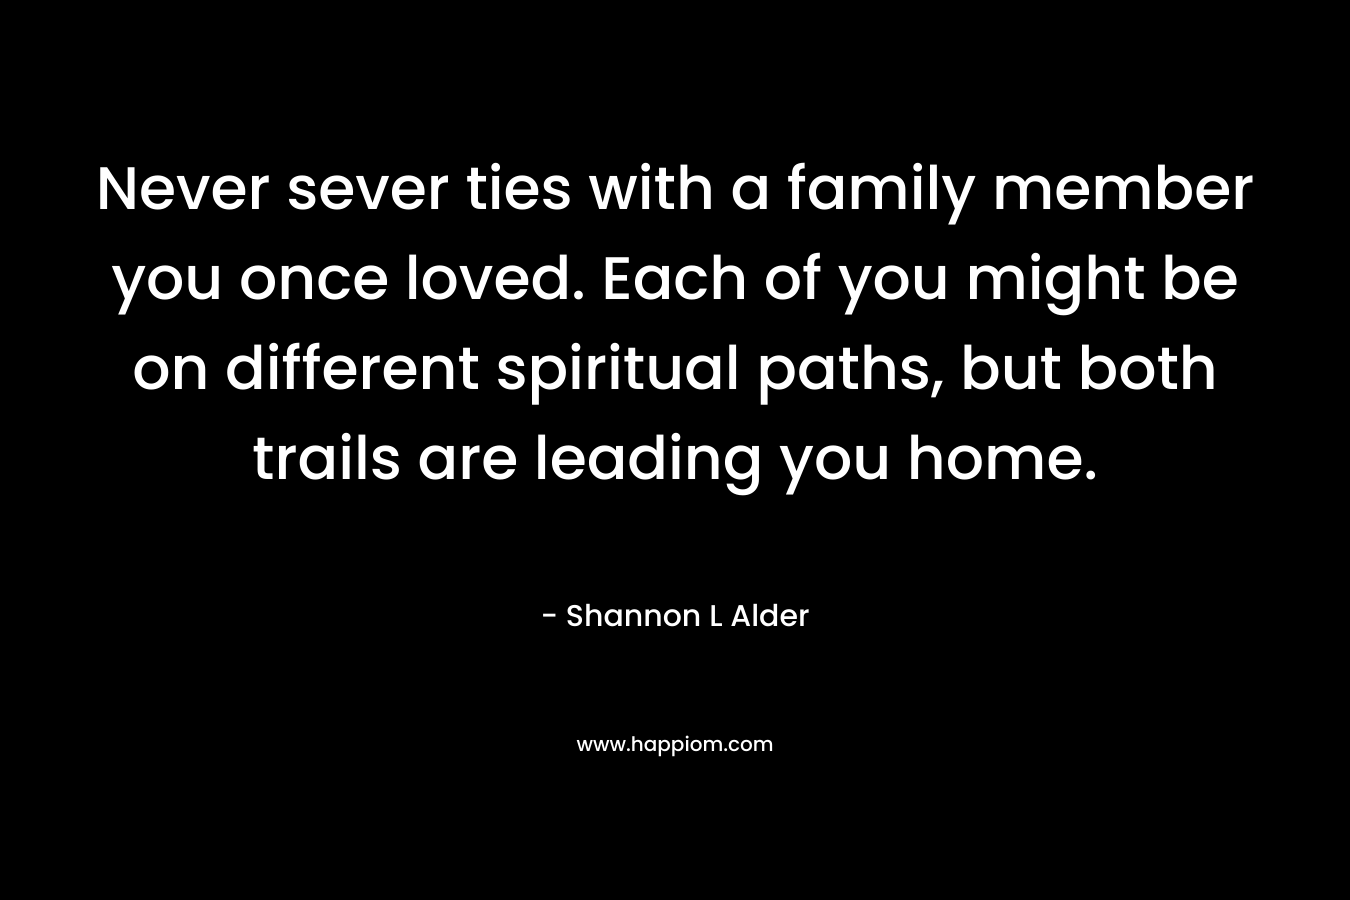 Never sever ties with a family member you once loved. Each of you might be on different spiritual paths, but both trails are leading you home.